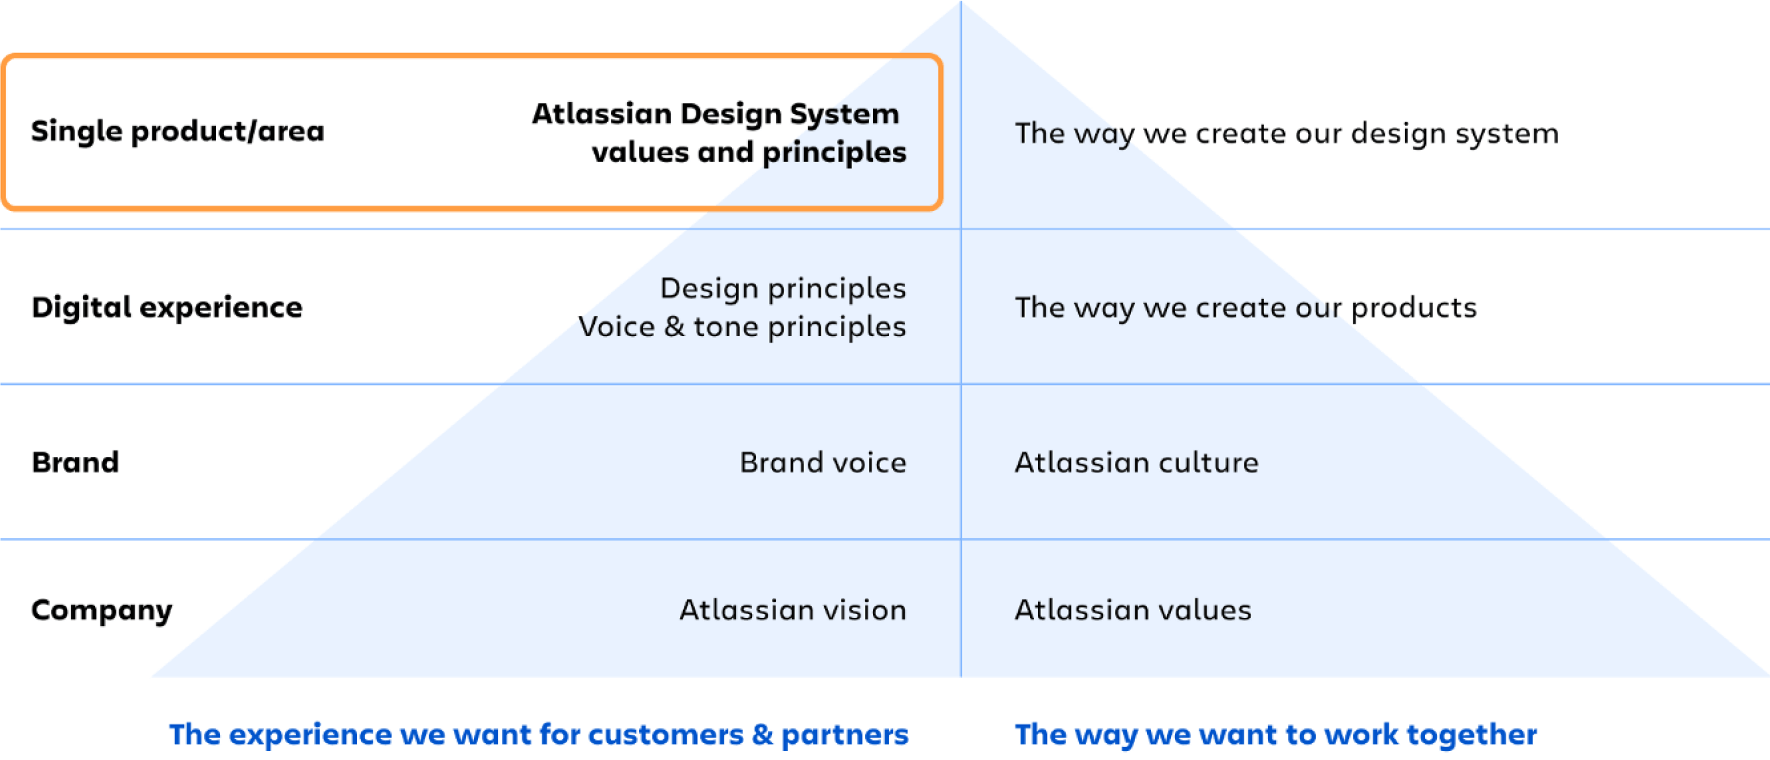 A visual diagram of where the values and principles of the Atlassian Design System fit into the Atlassian CX context